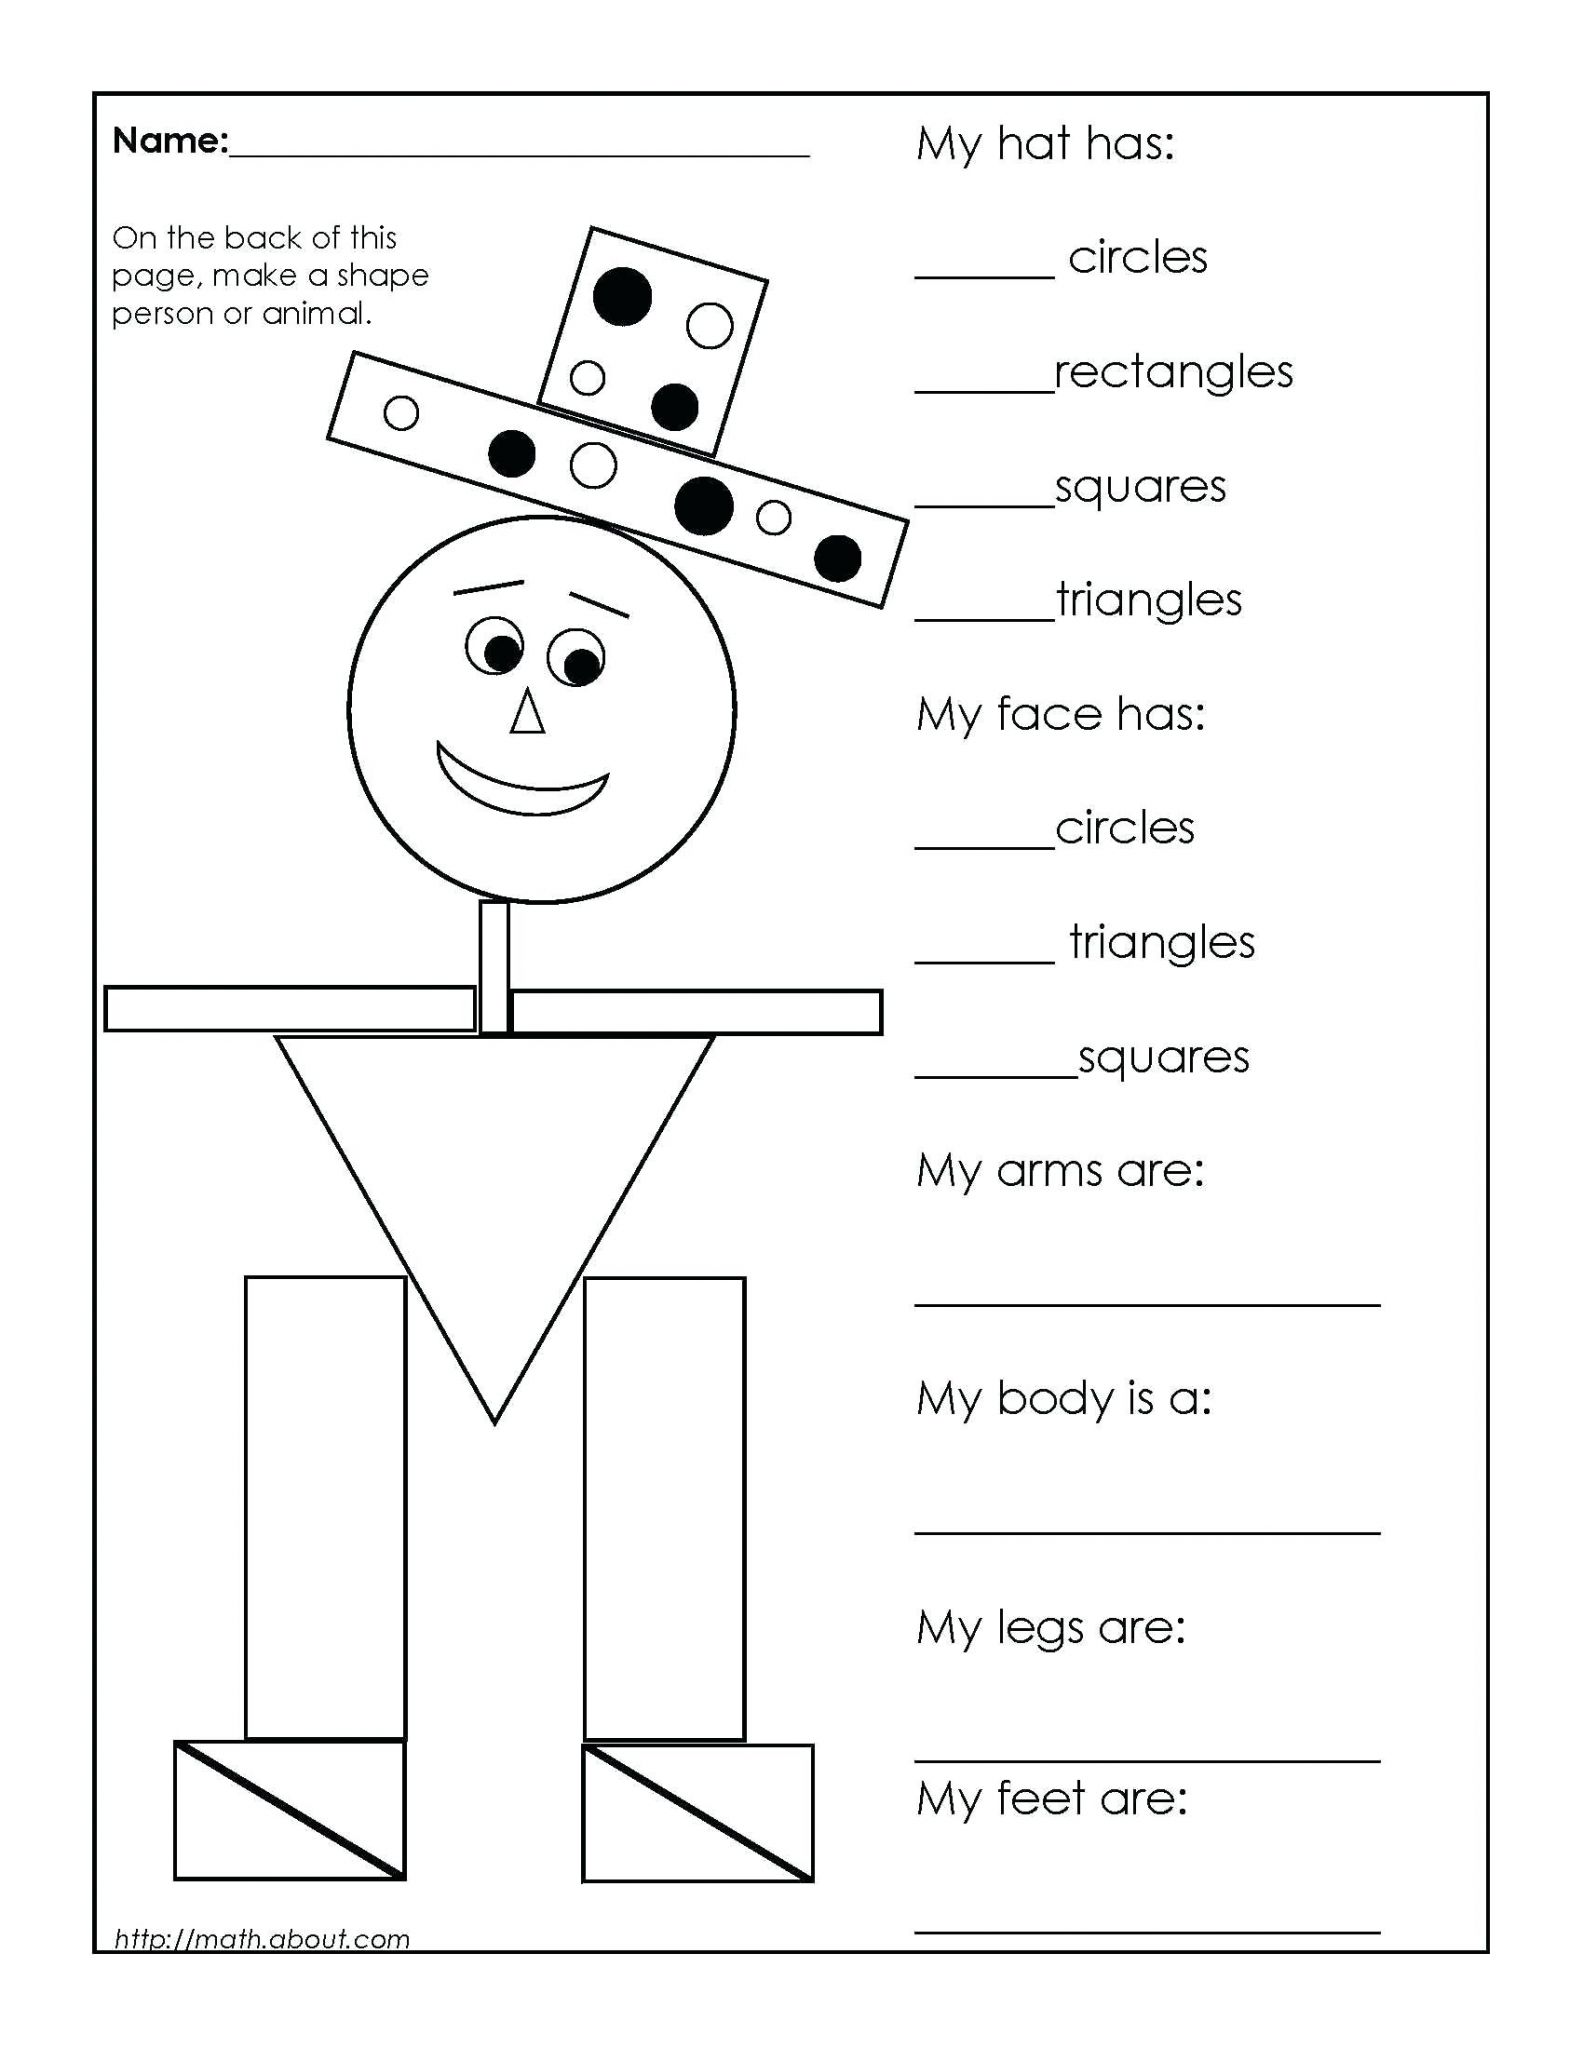 3-free-math-worksheets-second-grade-2-counting-money-money-in-words-apocalomegaproductions